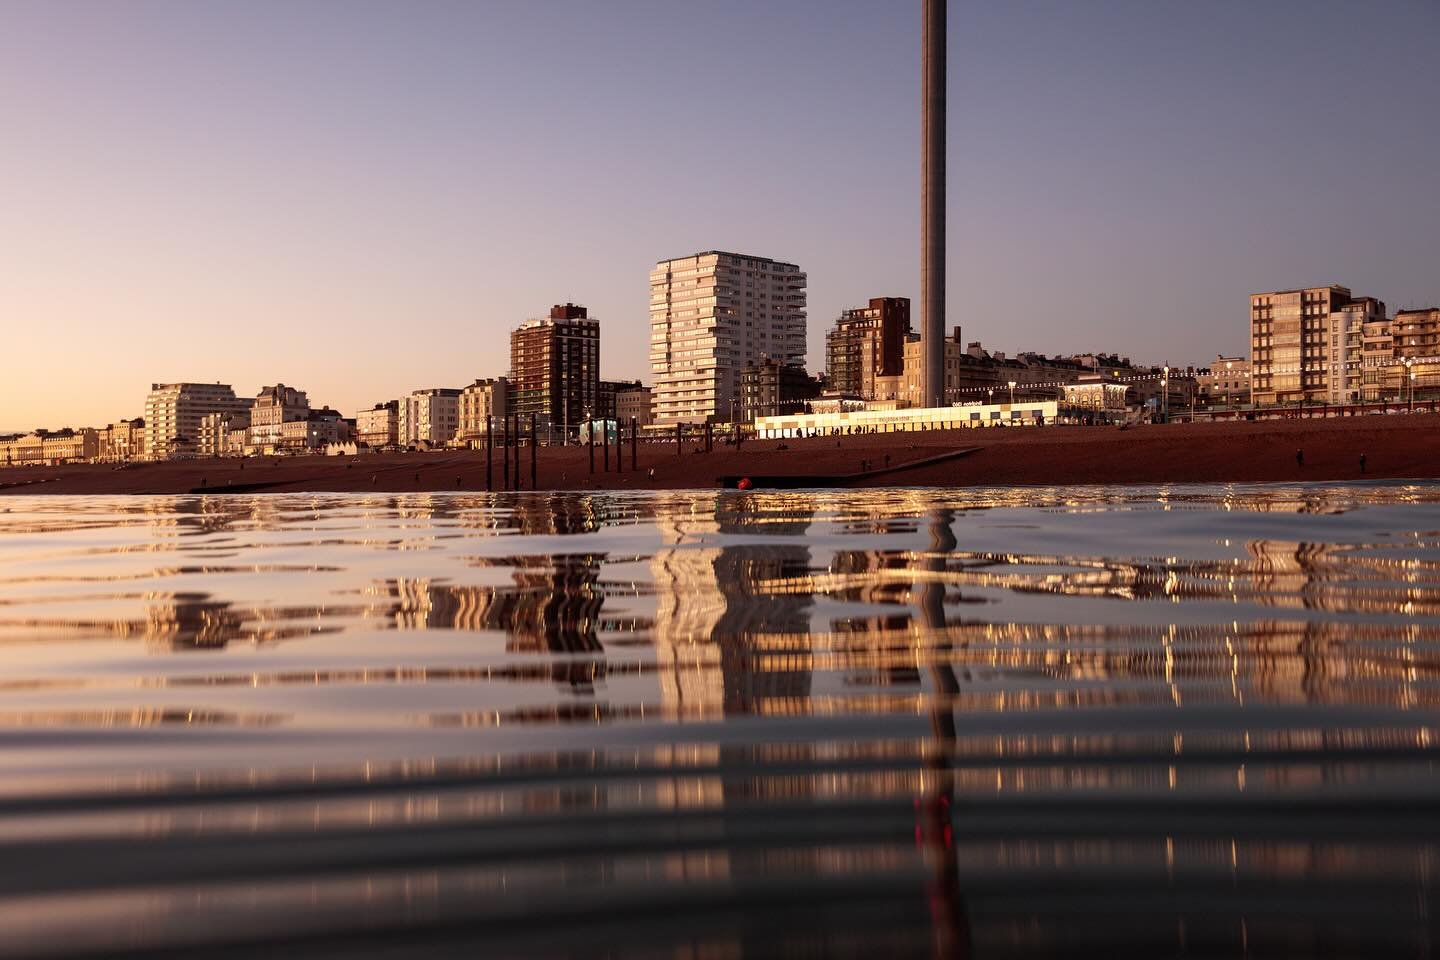 Good morning Brighton. Hope you&rsquo;re all enjoying your new March picture in our &lsquo;Sea Views&rsquo; calendar. Taken during a twilight swim at this time last year. The glow of a winter sunset making Brighton&rsquo;s seafront architecture mishm